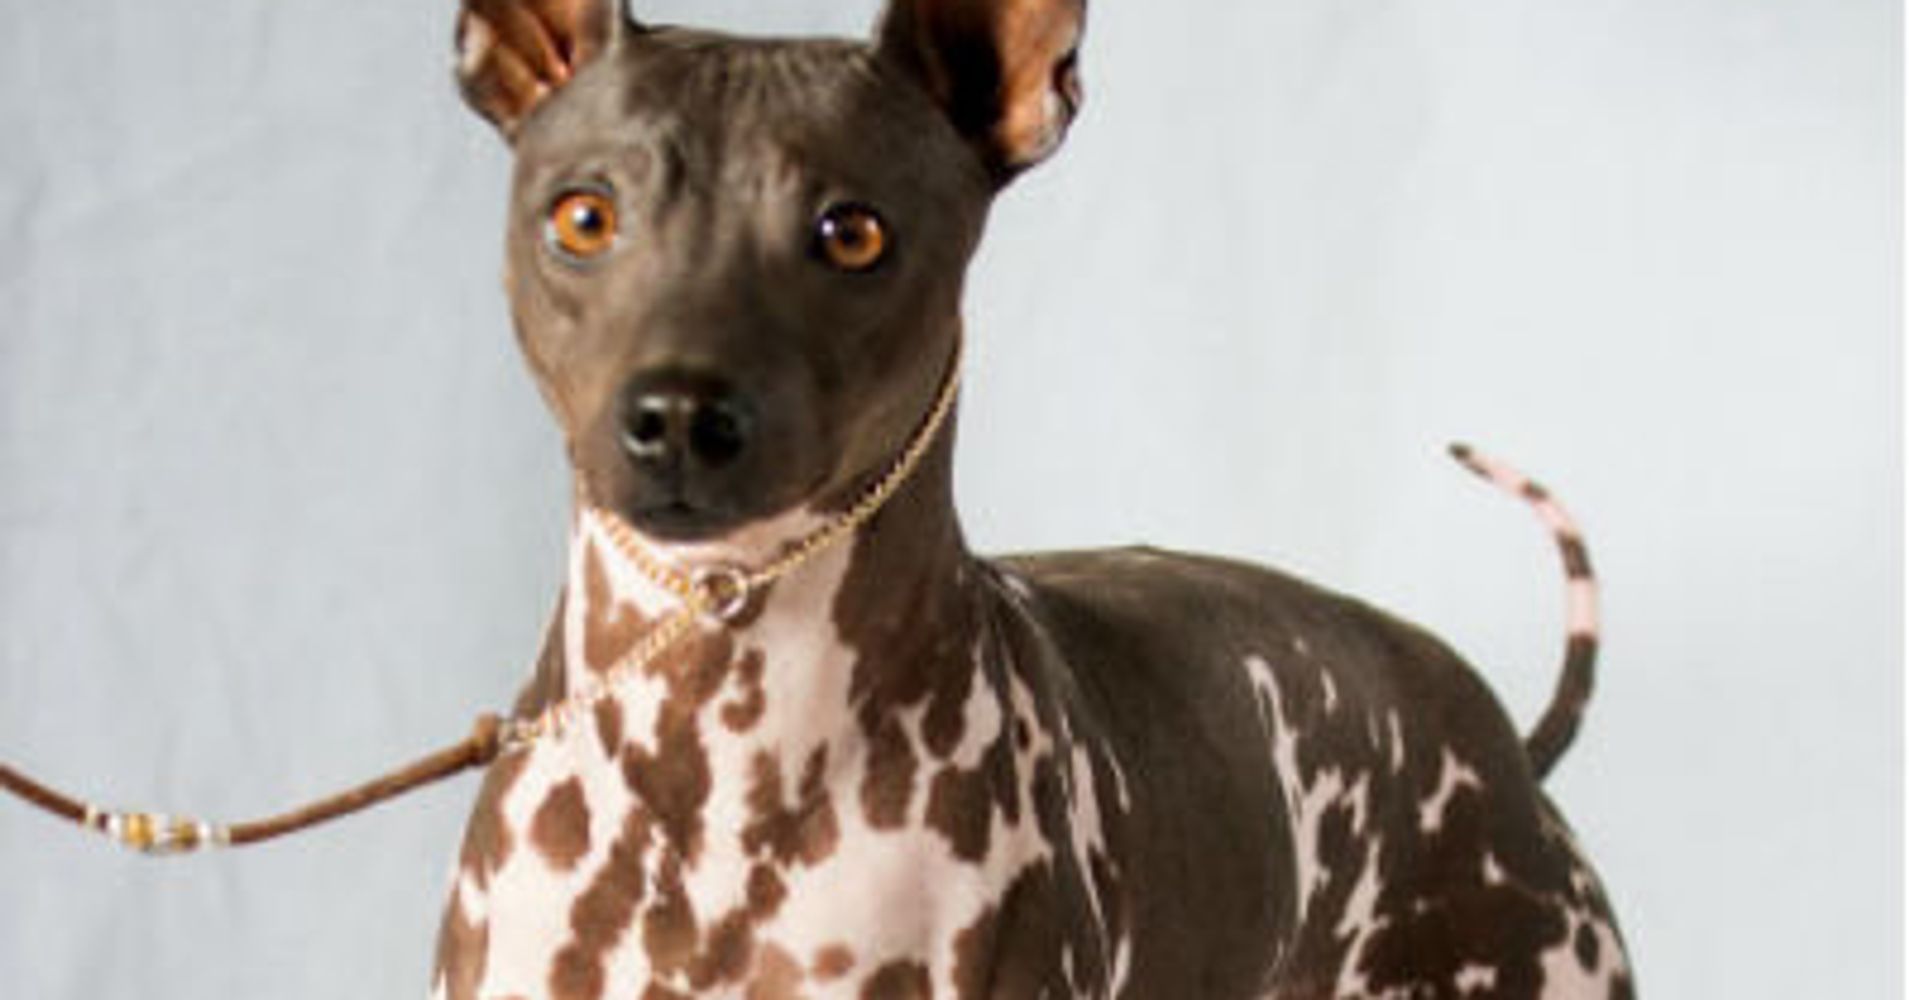 2 New Dog Breeds Recognized By The American Kennel Club | HuffPost